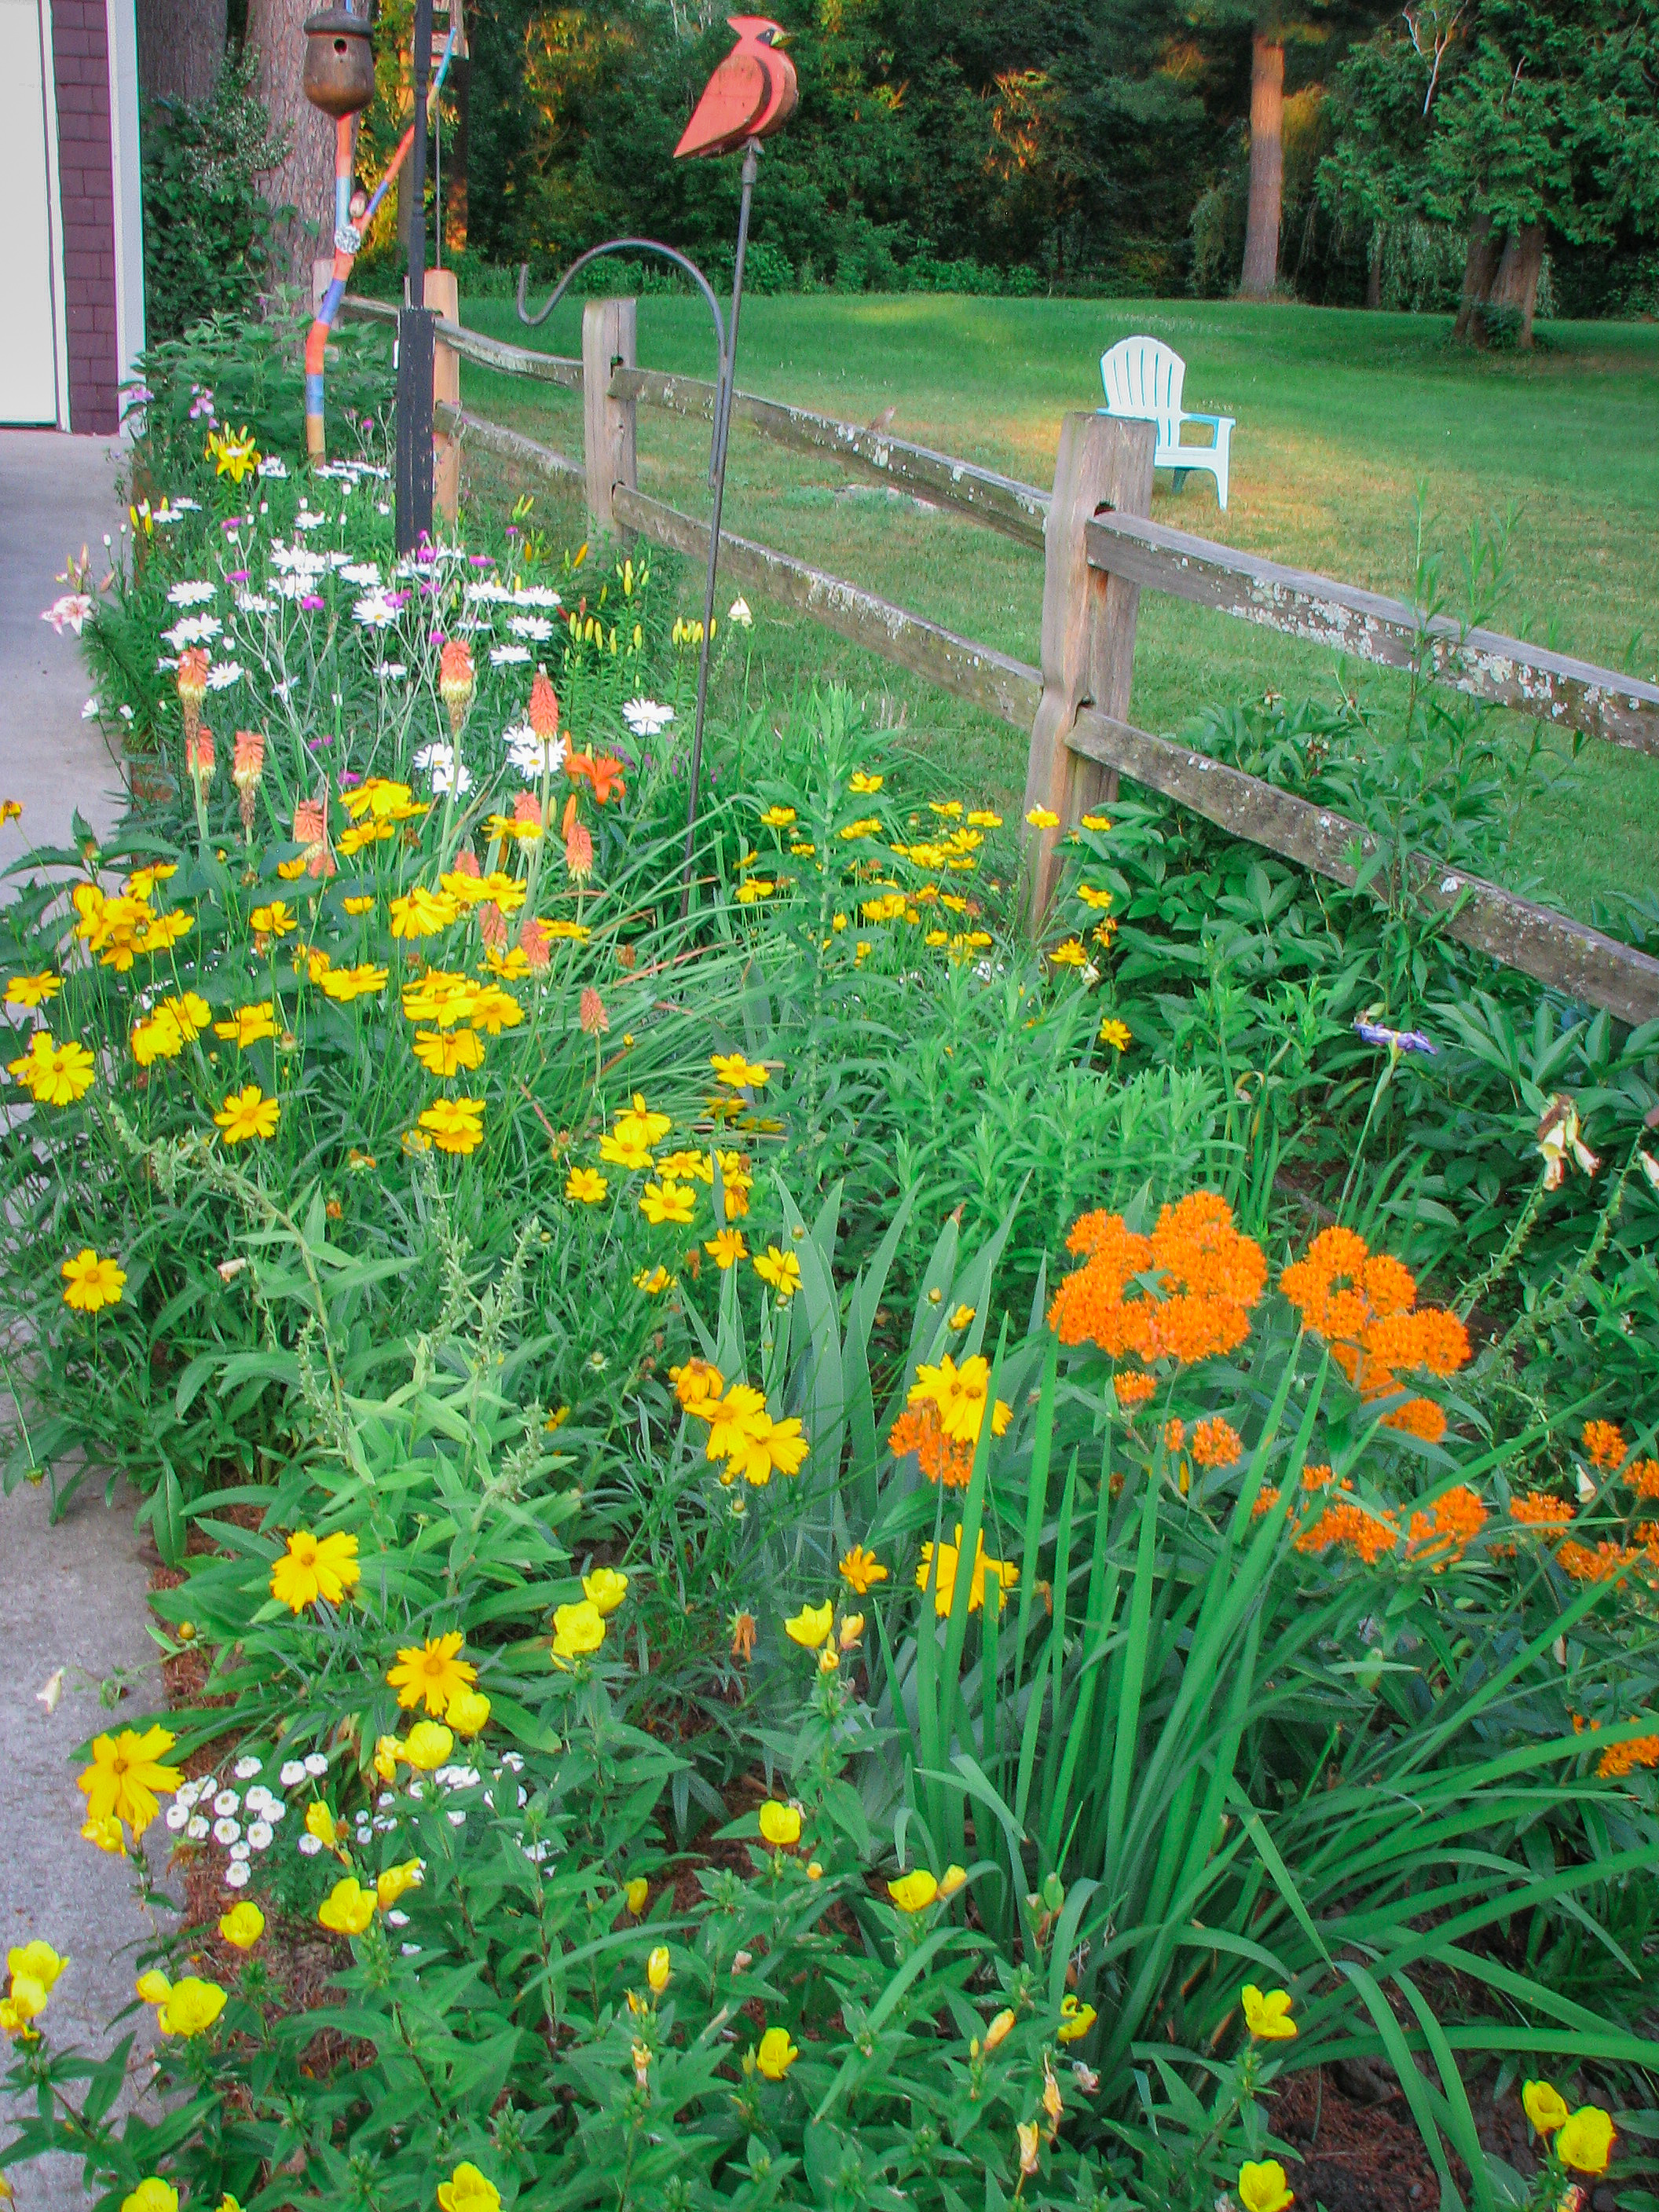 Garden along back fence with mostly yellow flowers